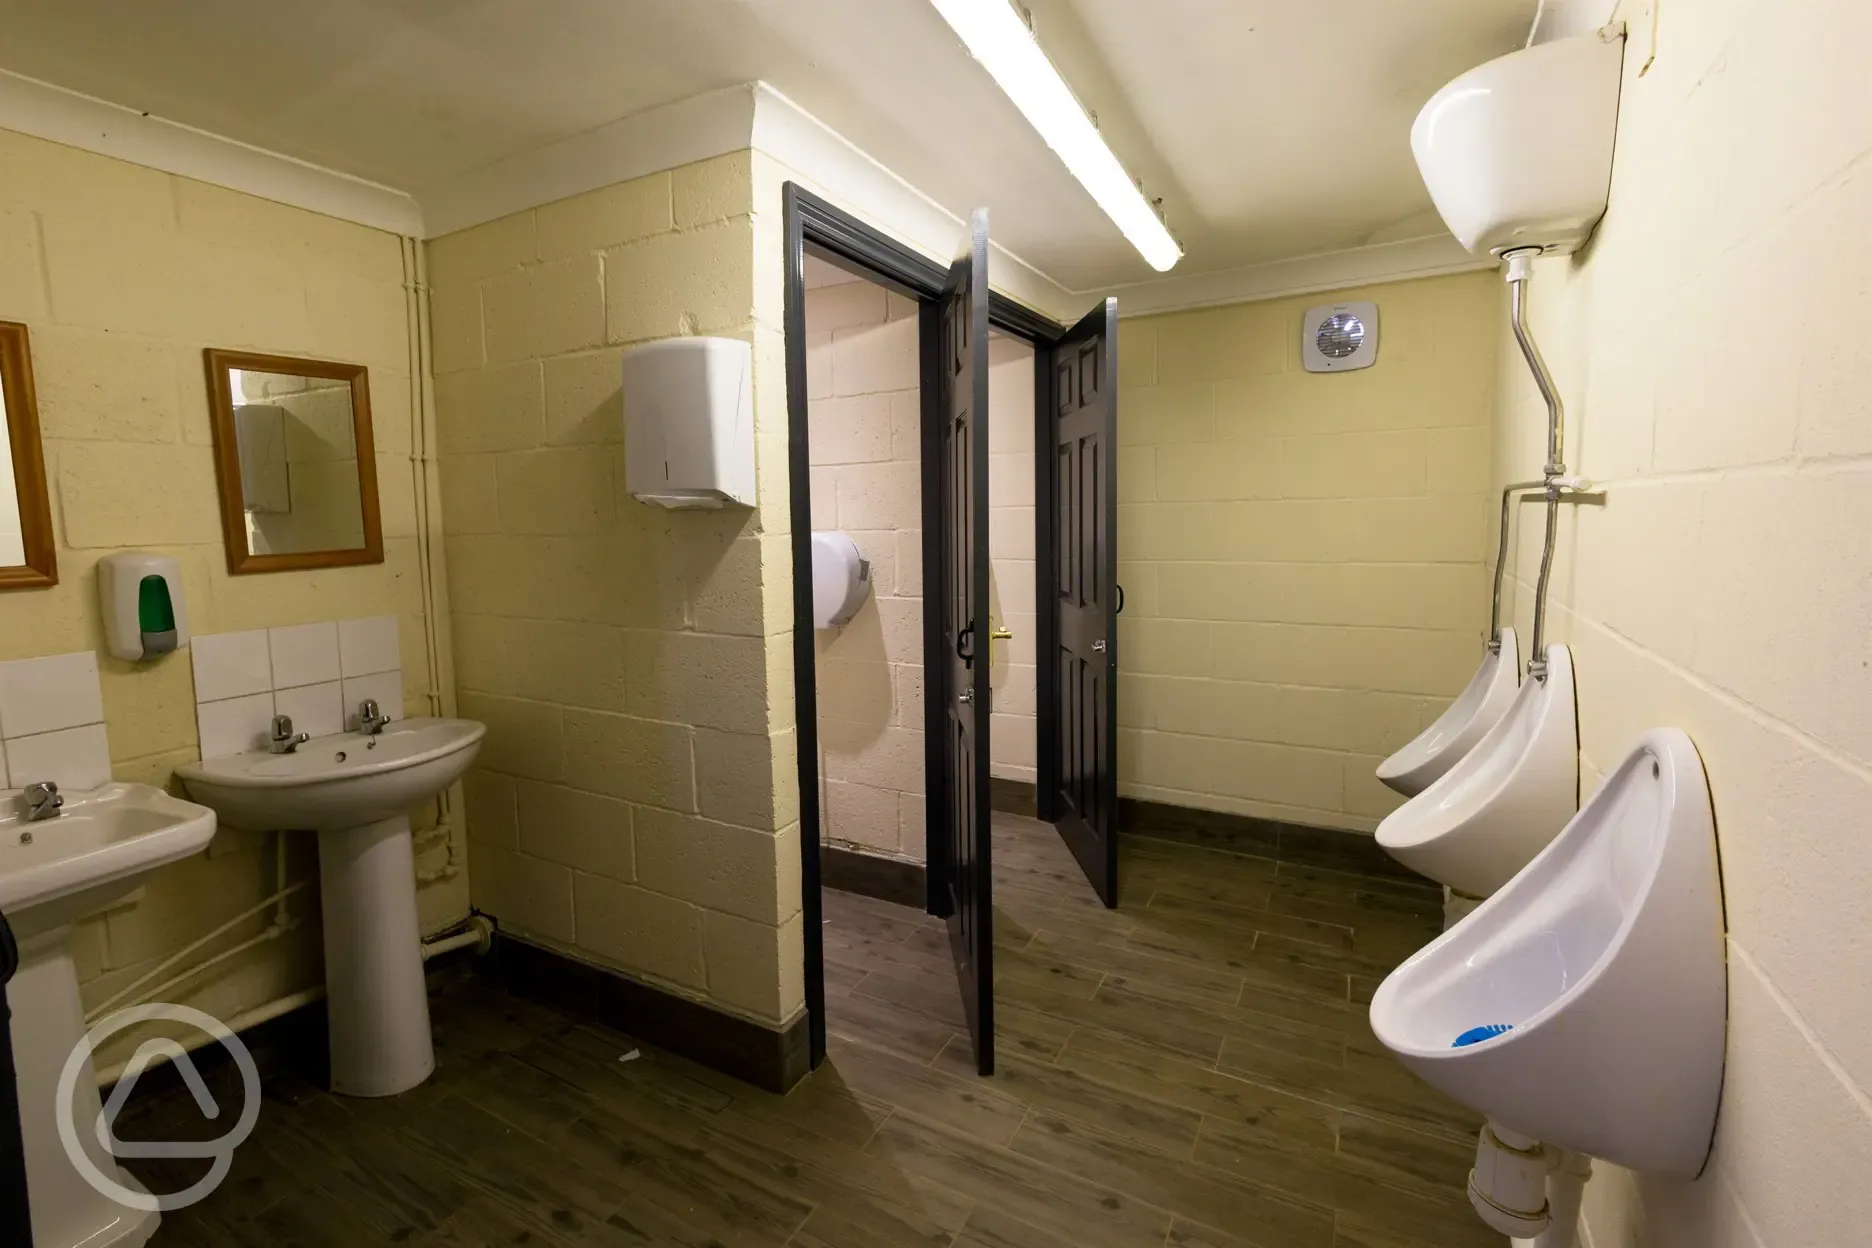 Men's toilets with 2 cubicles urinals, unisex also available